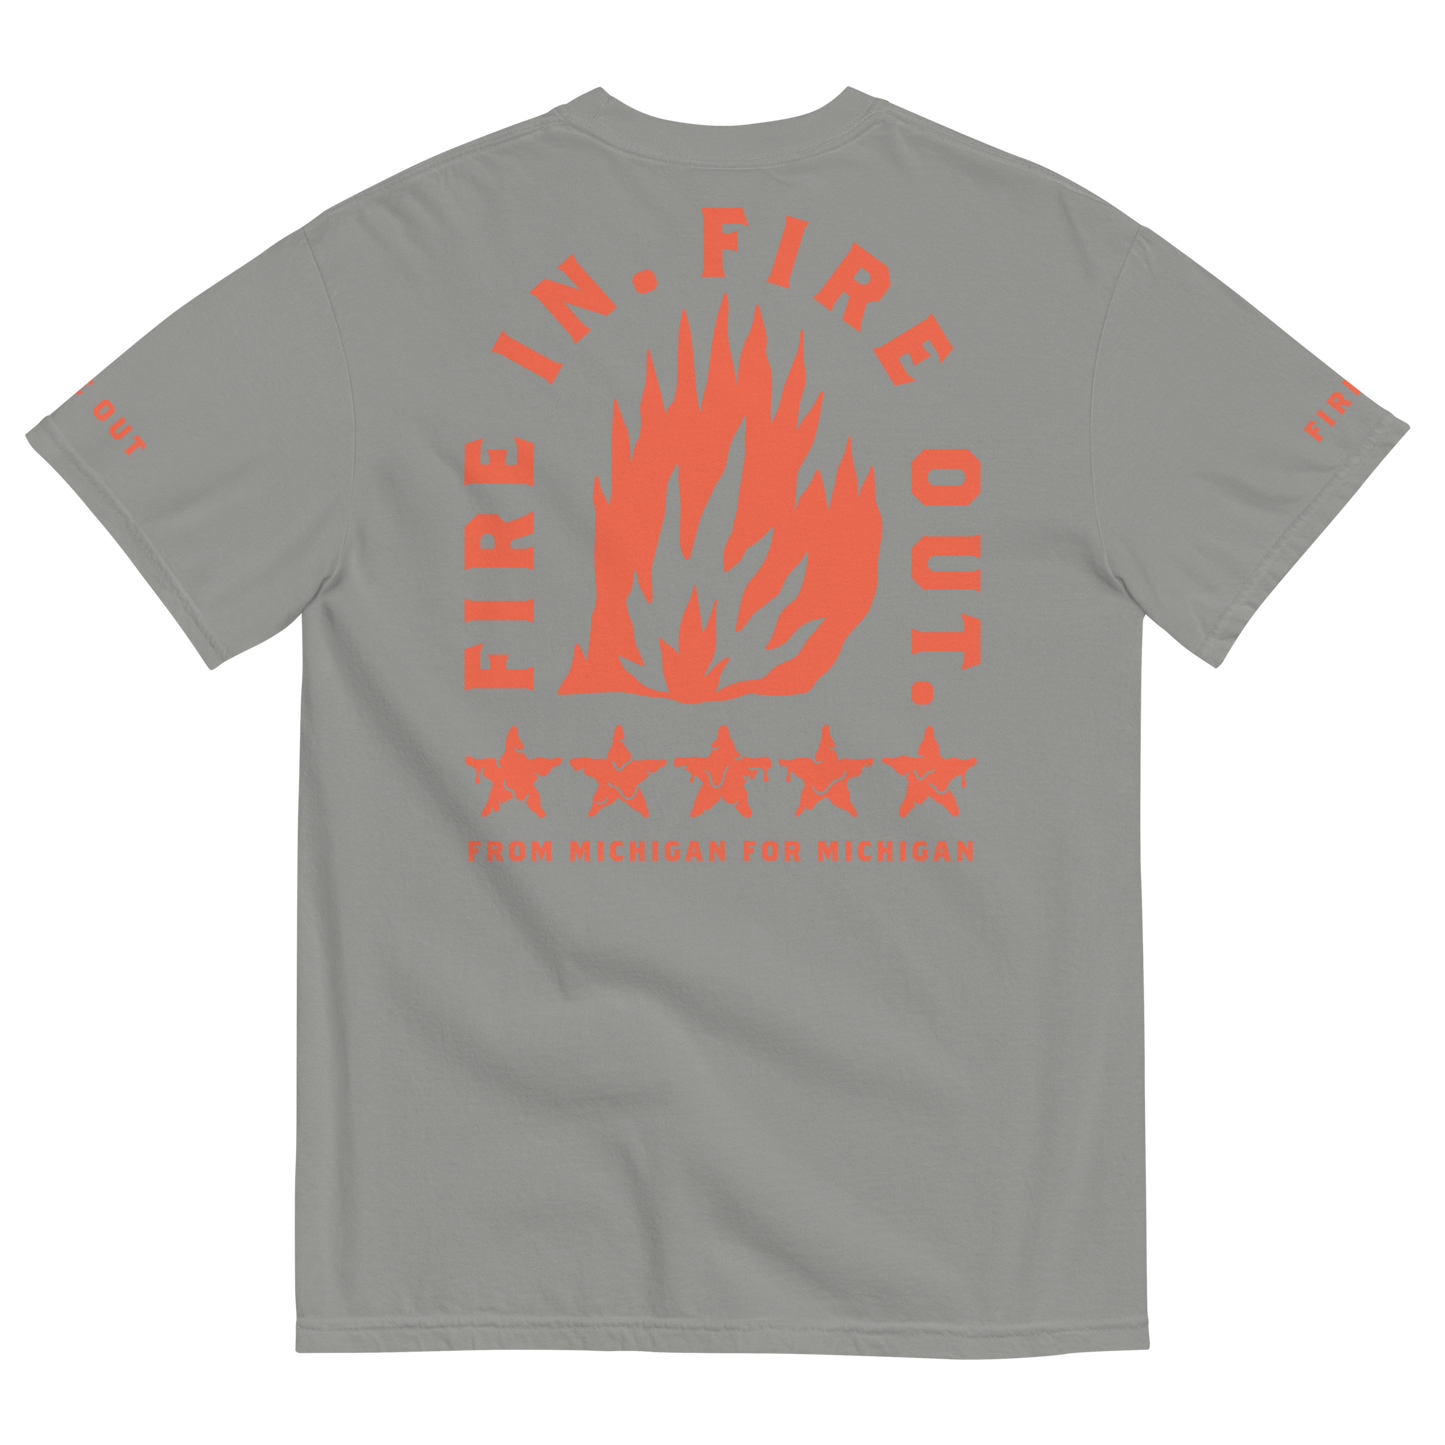 Fire In. Fire Out. Five Star Extracts Tee